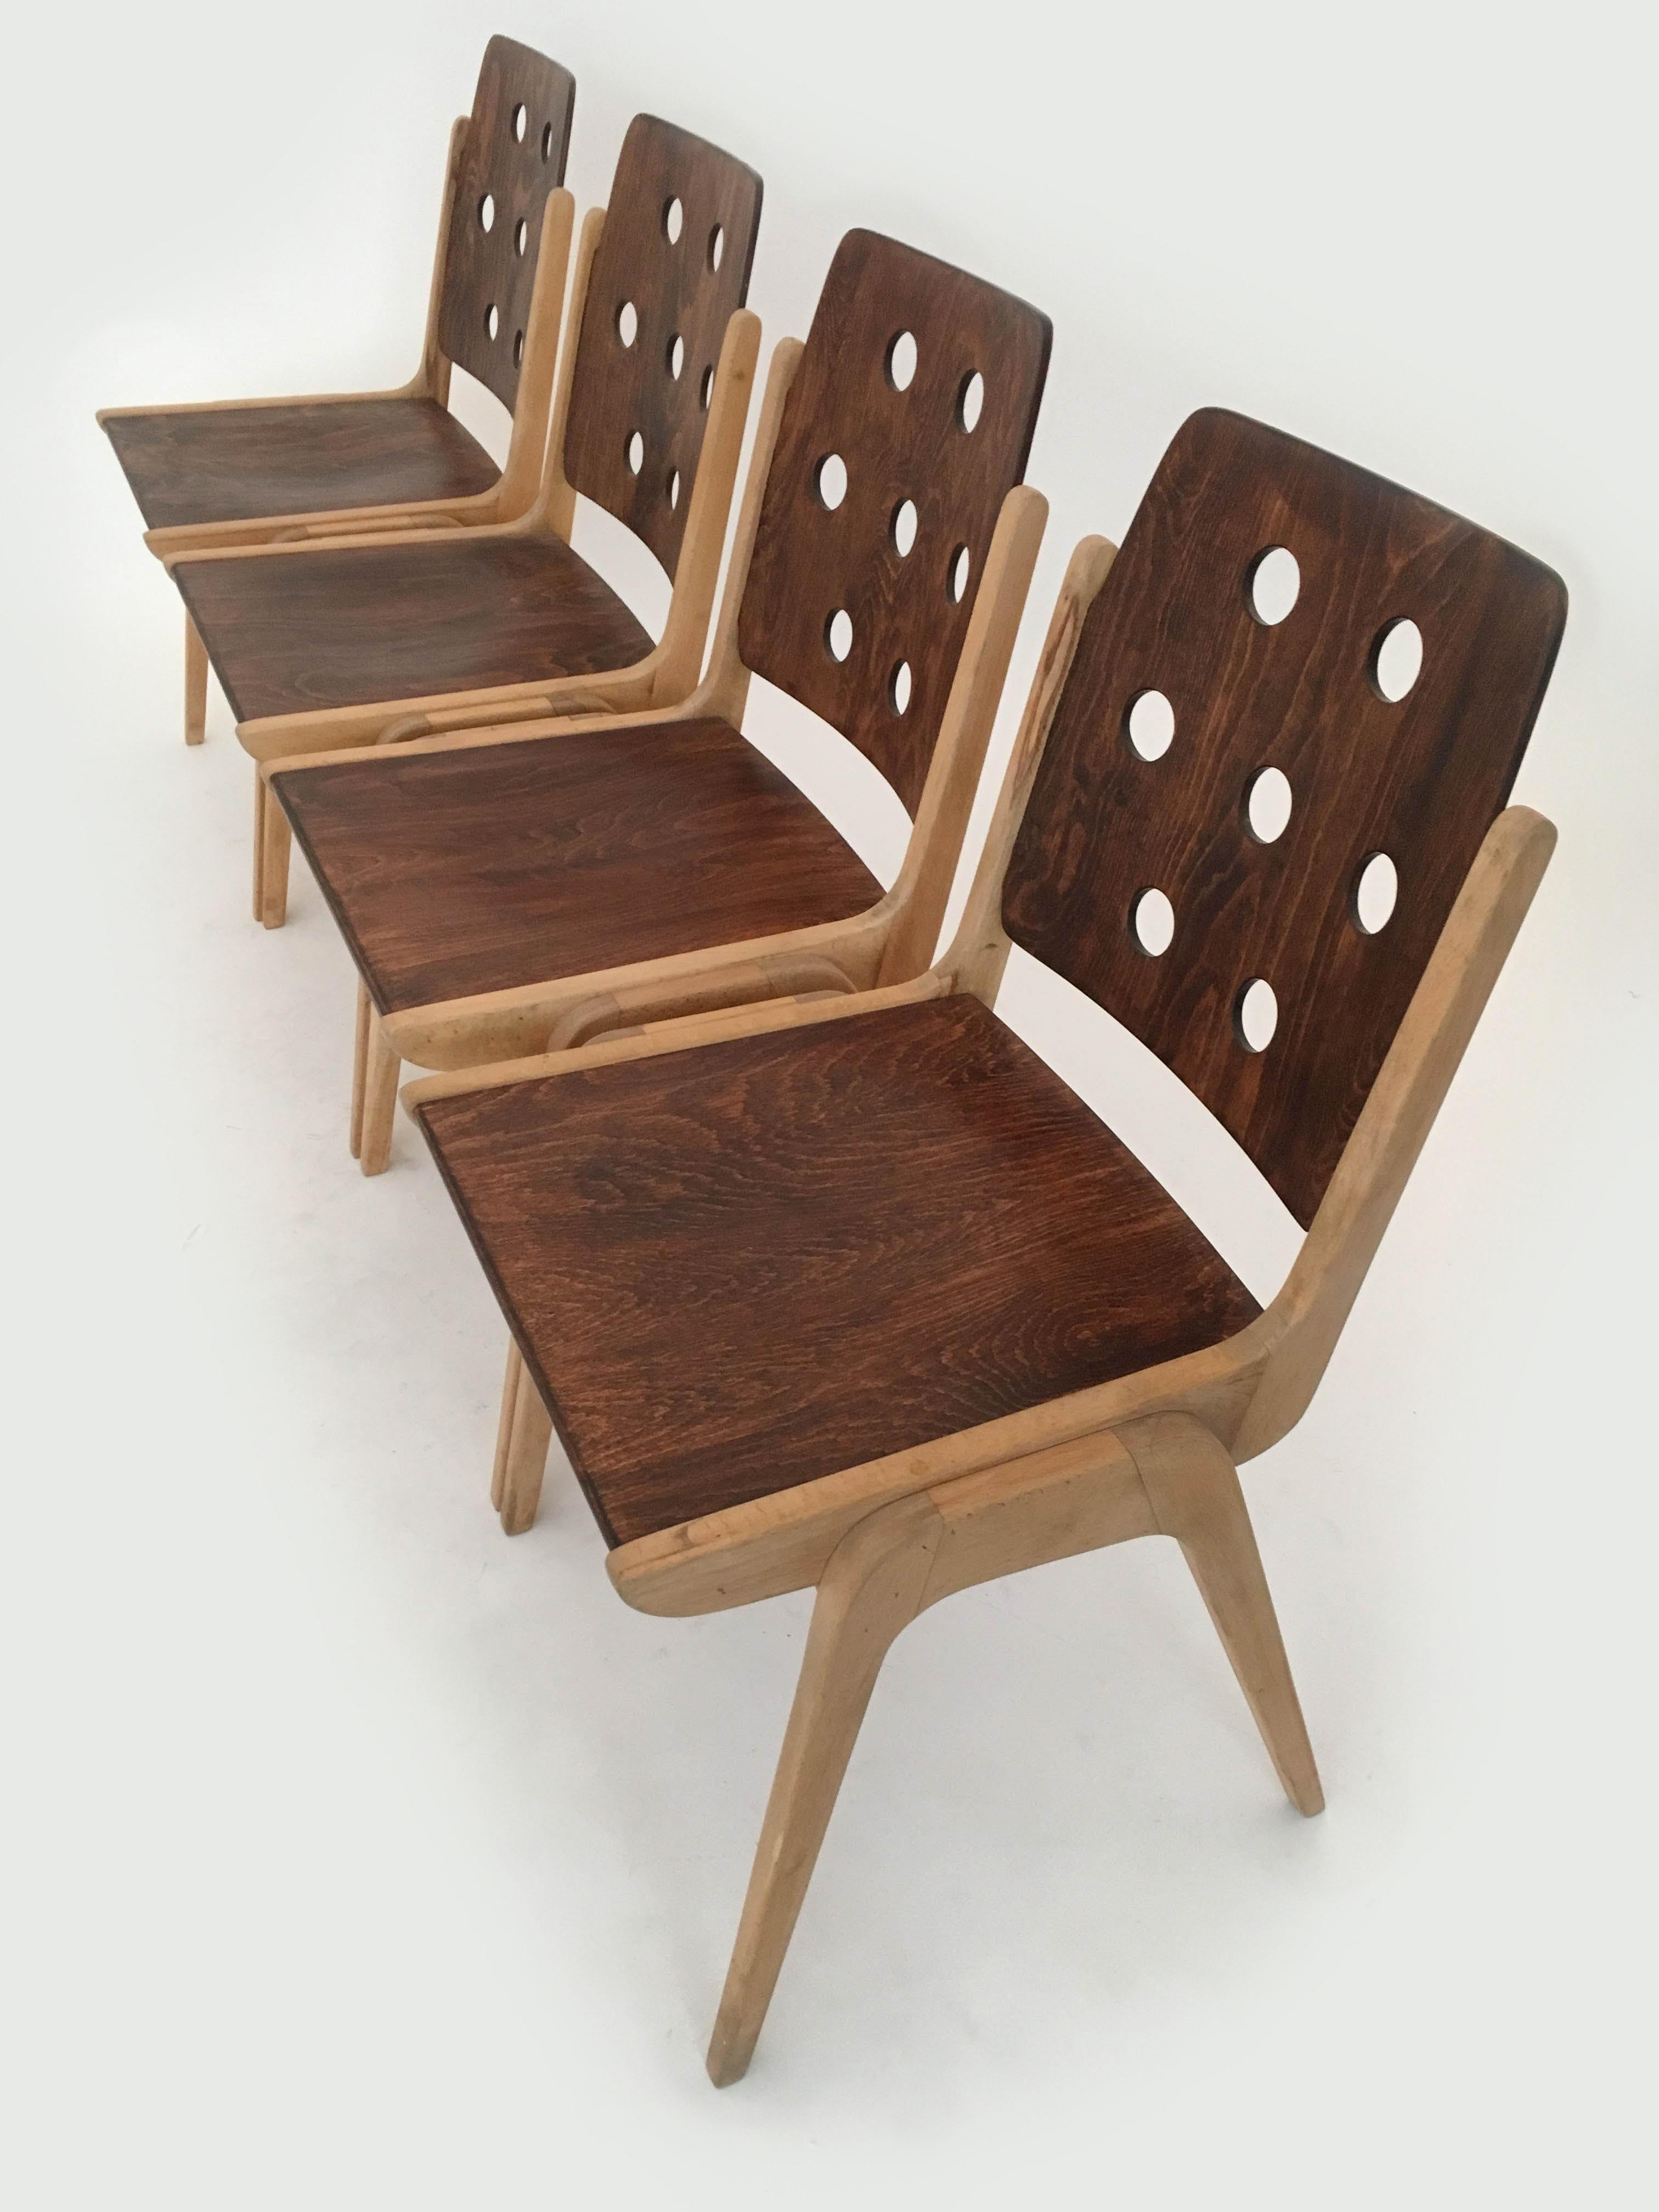 Set of Four Stacking Chairs Franz Schuster, Duo-Colored, Austria 1950s For Sale 4